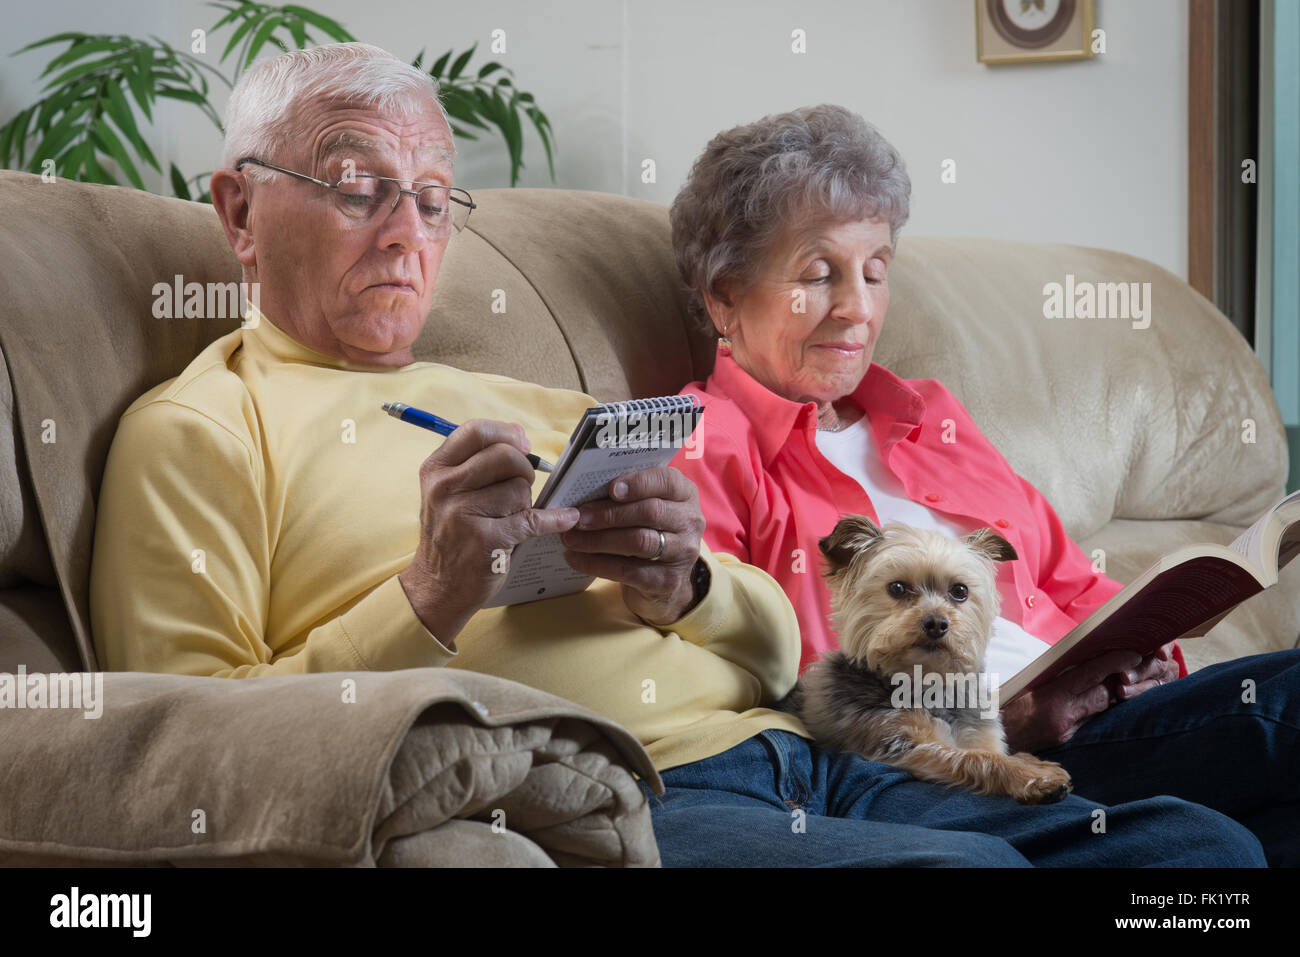 An older couple relaxes together with their lap dog keeping them company. Stock Photo